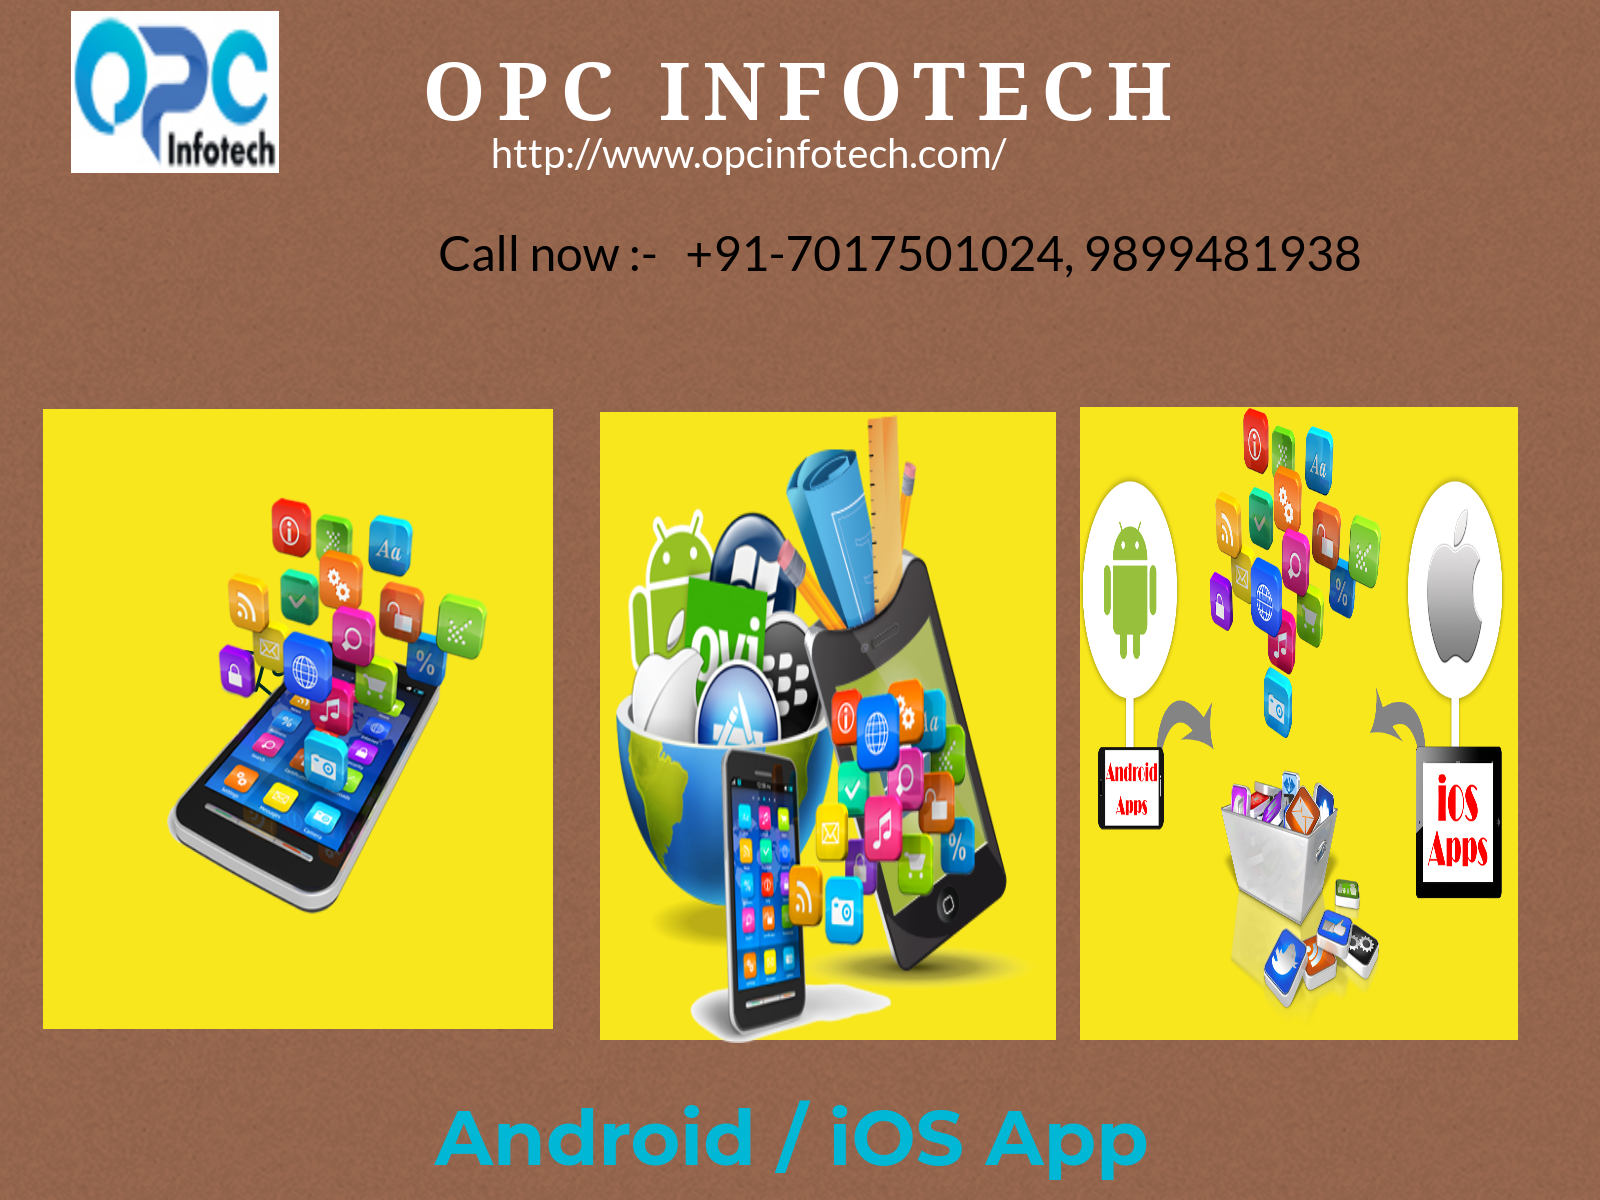 OPC INFOTECH - Android Mobile App Development Company in NoidaServicesEverything ElseNoidaNoida Sector 15